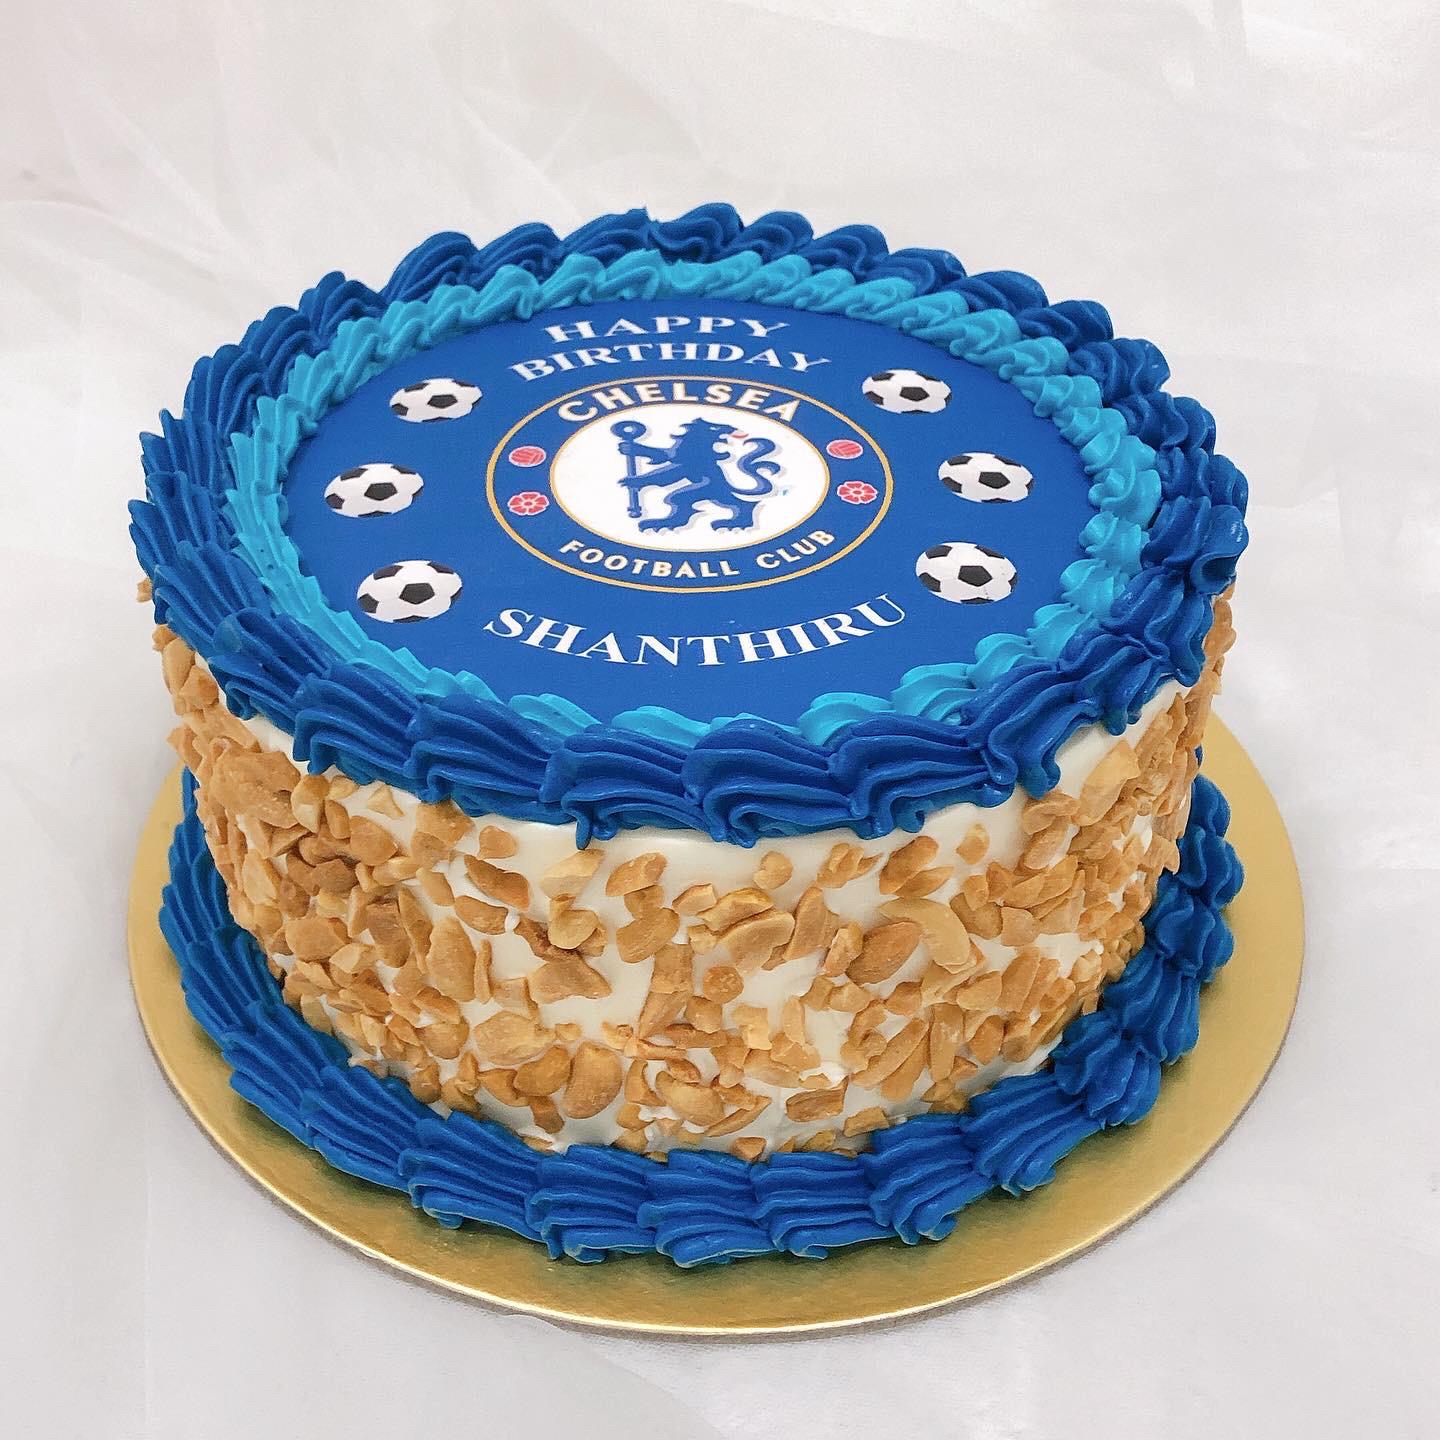 Today is my birthday and my friend decided to surprise me with this Chelsea  Themed Cake  rchelseafc